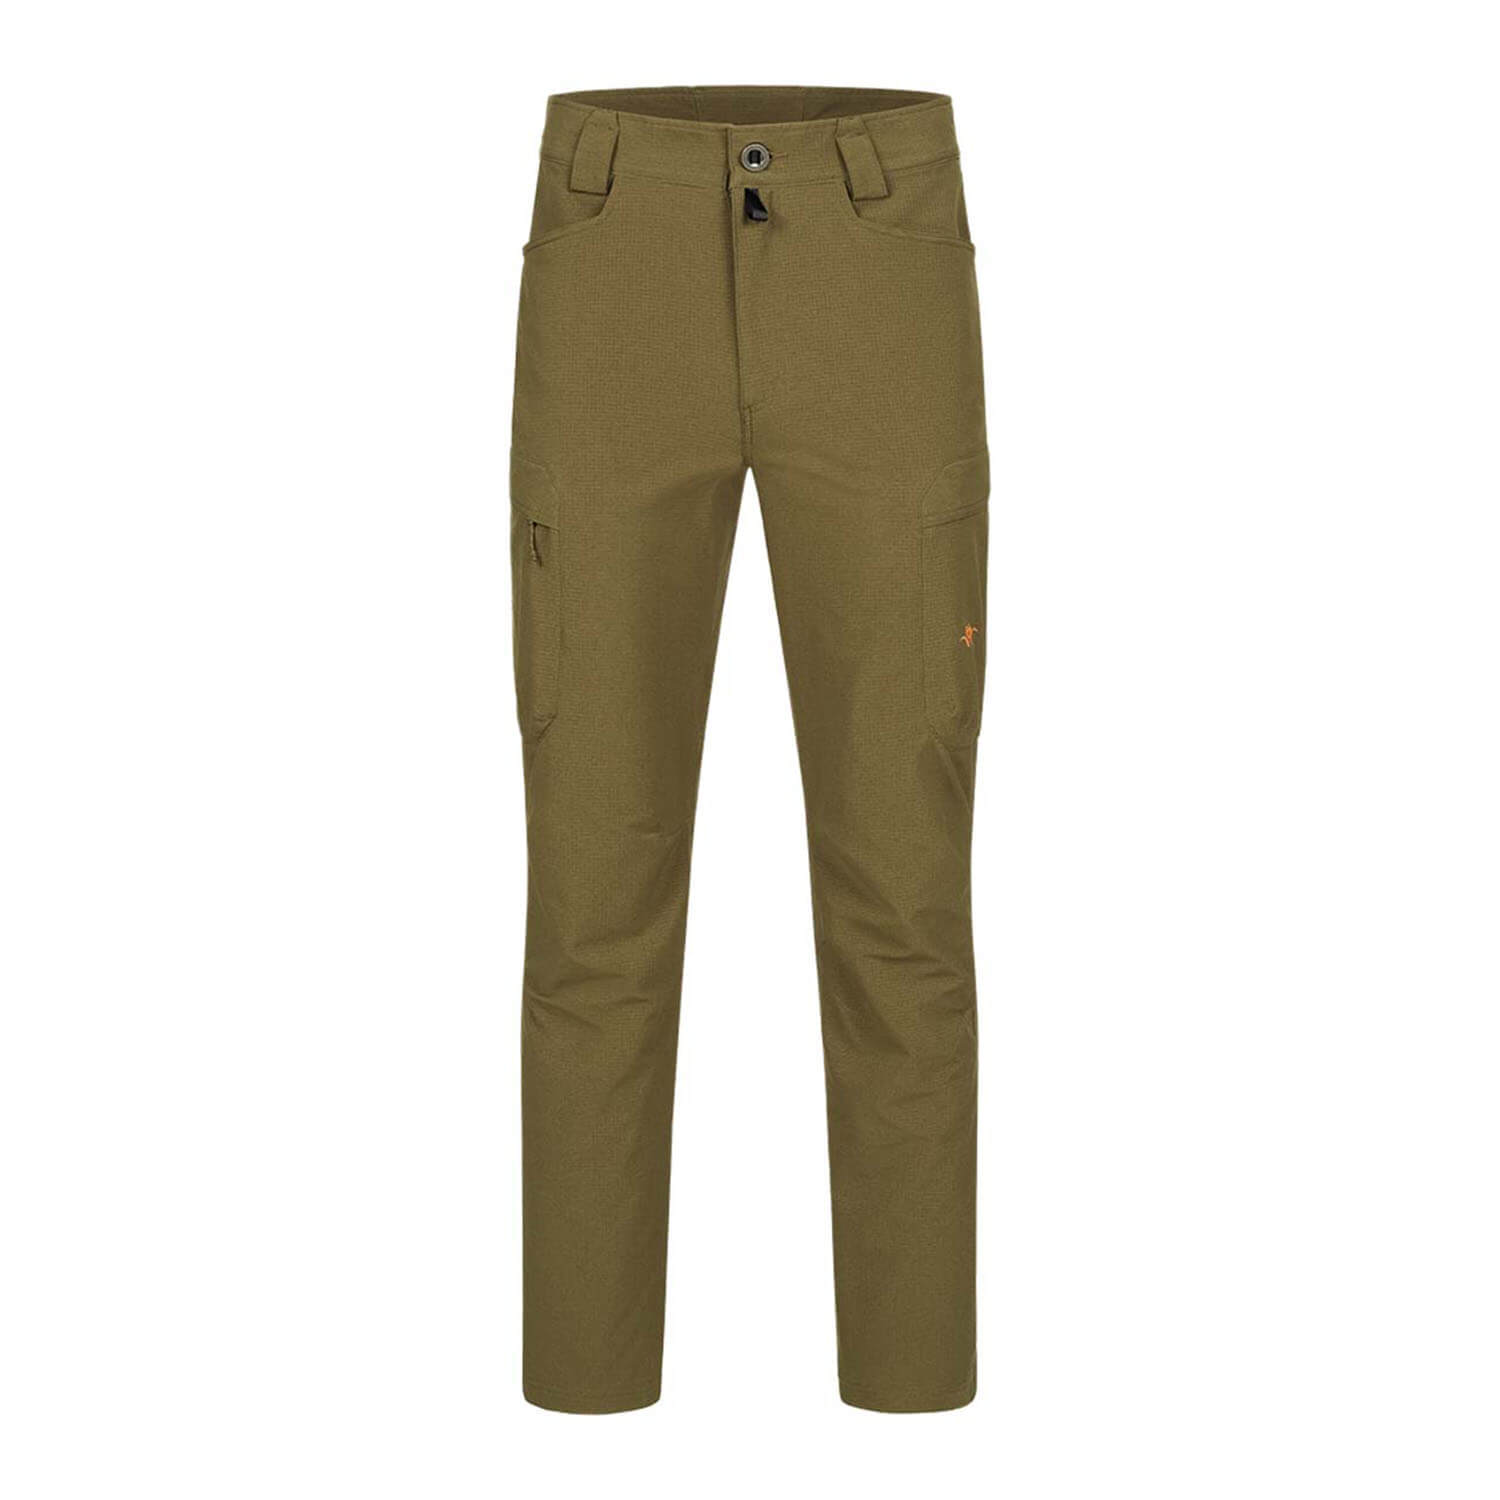 Blaser HunTec Trousers AirFlow (oliv) - Hunting Trousers